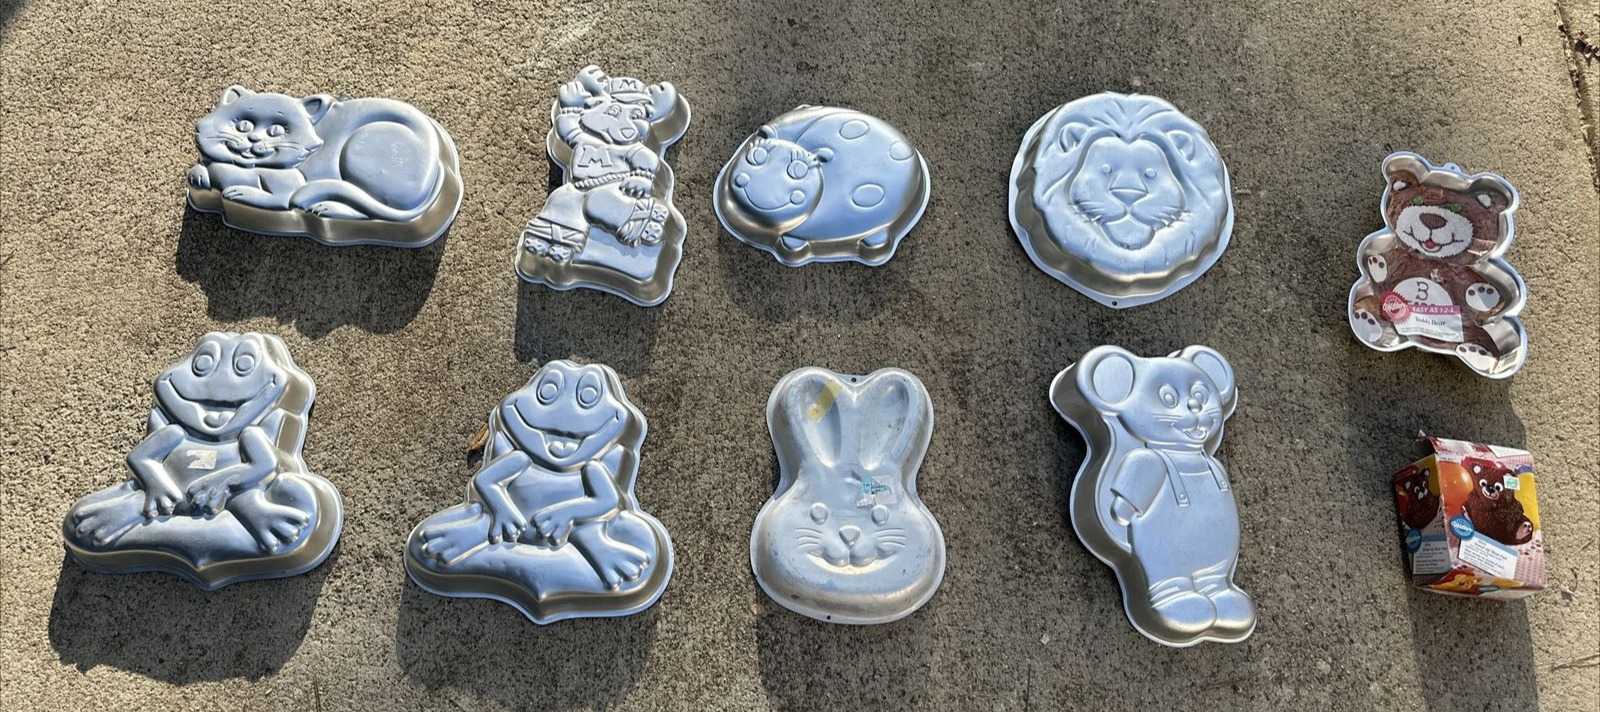 WILTON Vintage Cake Pan Lot Of 9 Animal Characters Lion, Frog, Mouse, Cat,Bear